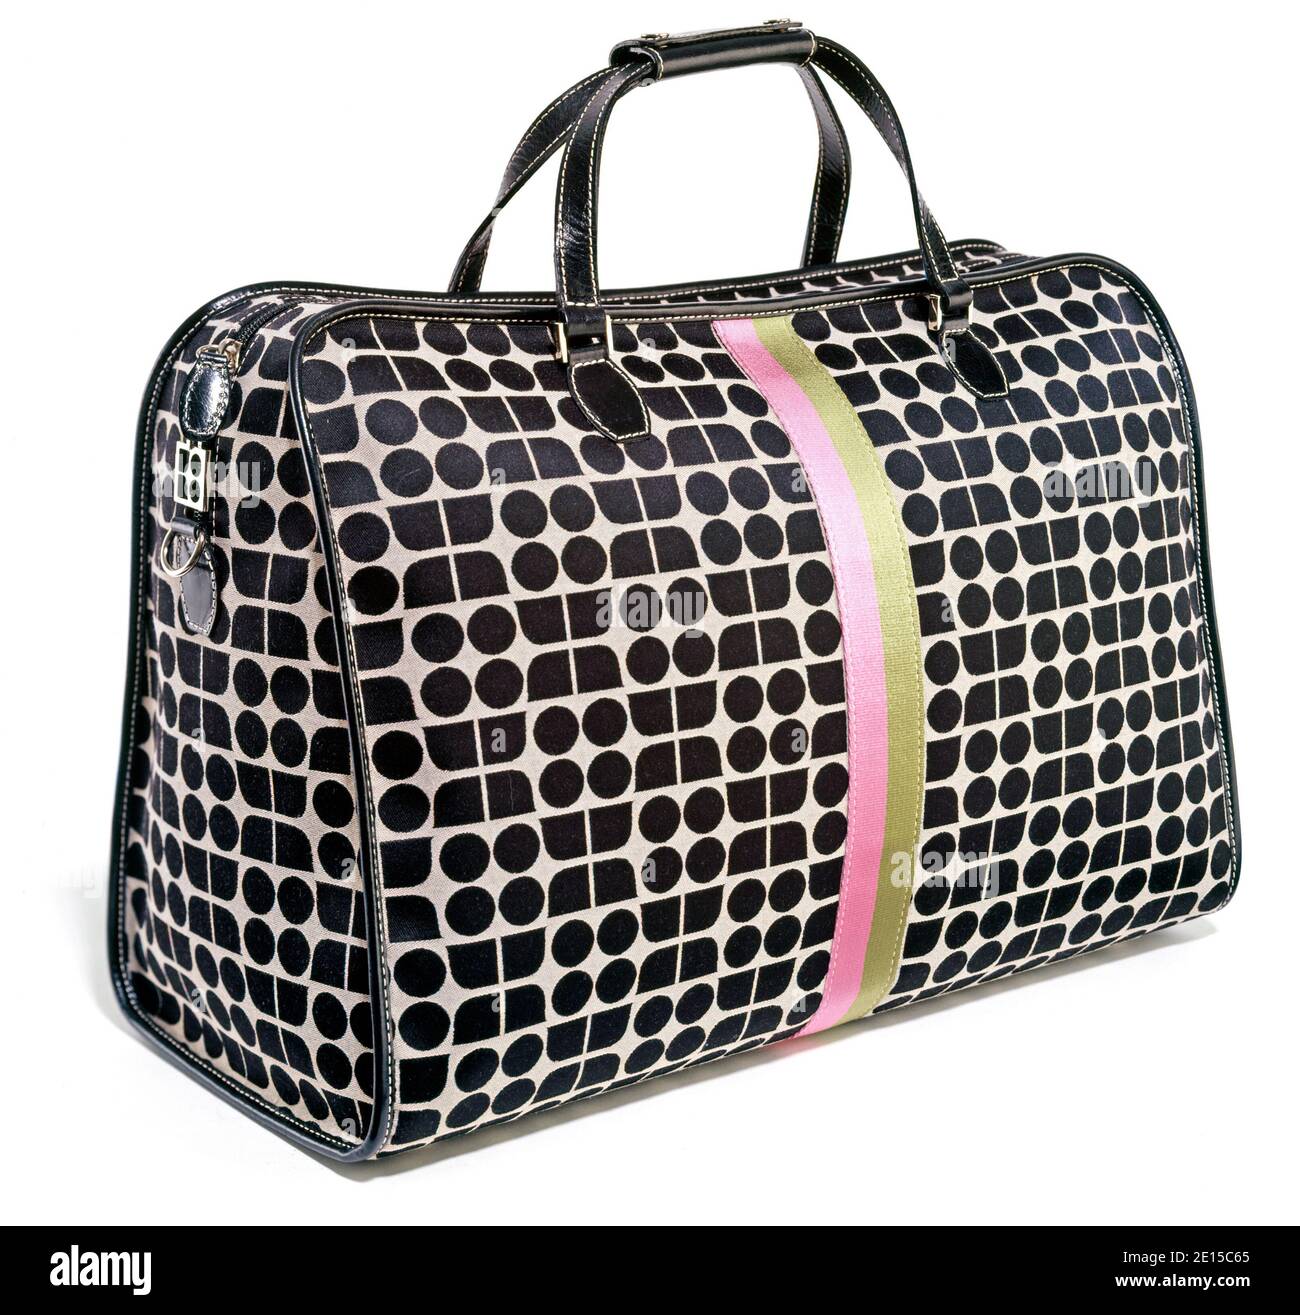 Kate Spade luggage bag photographed on a white background Stock Photo -  Alamy